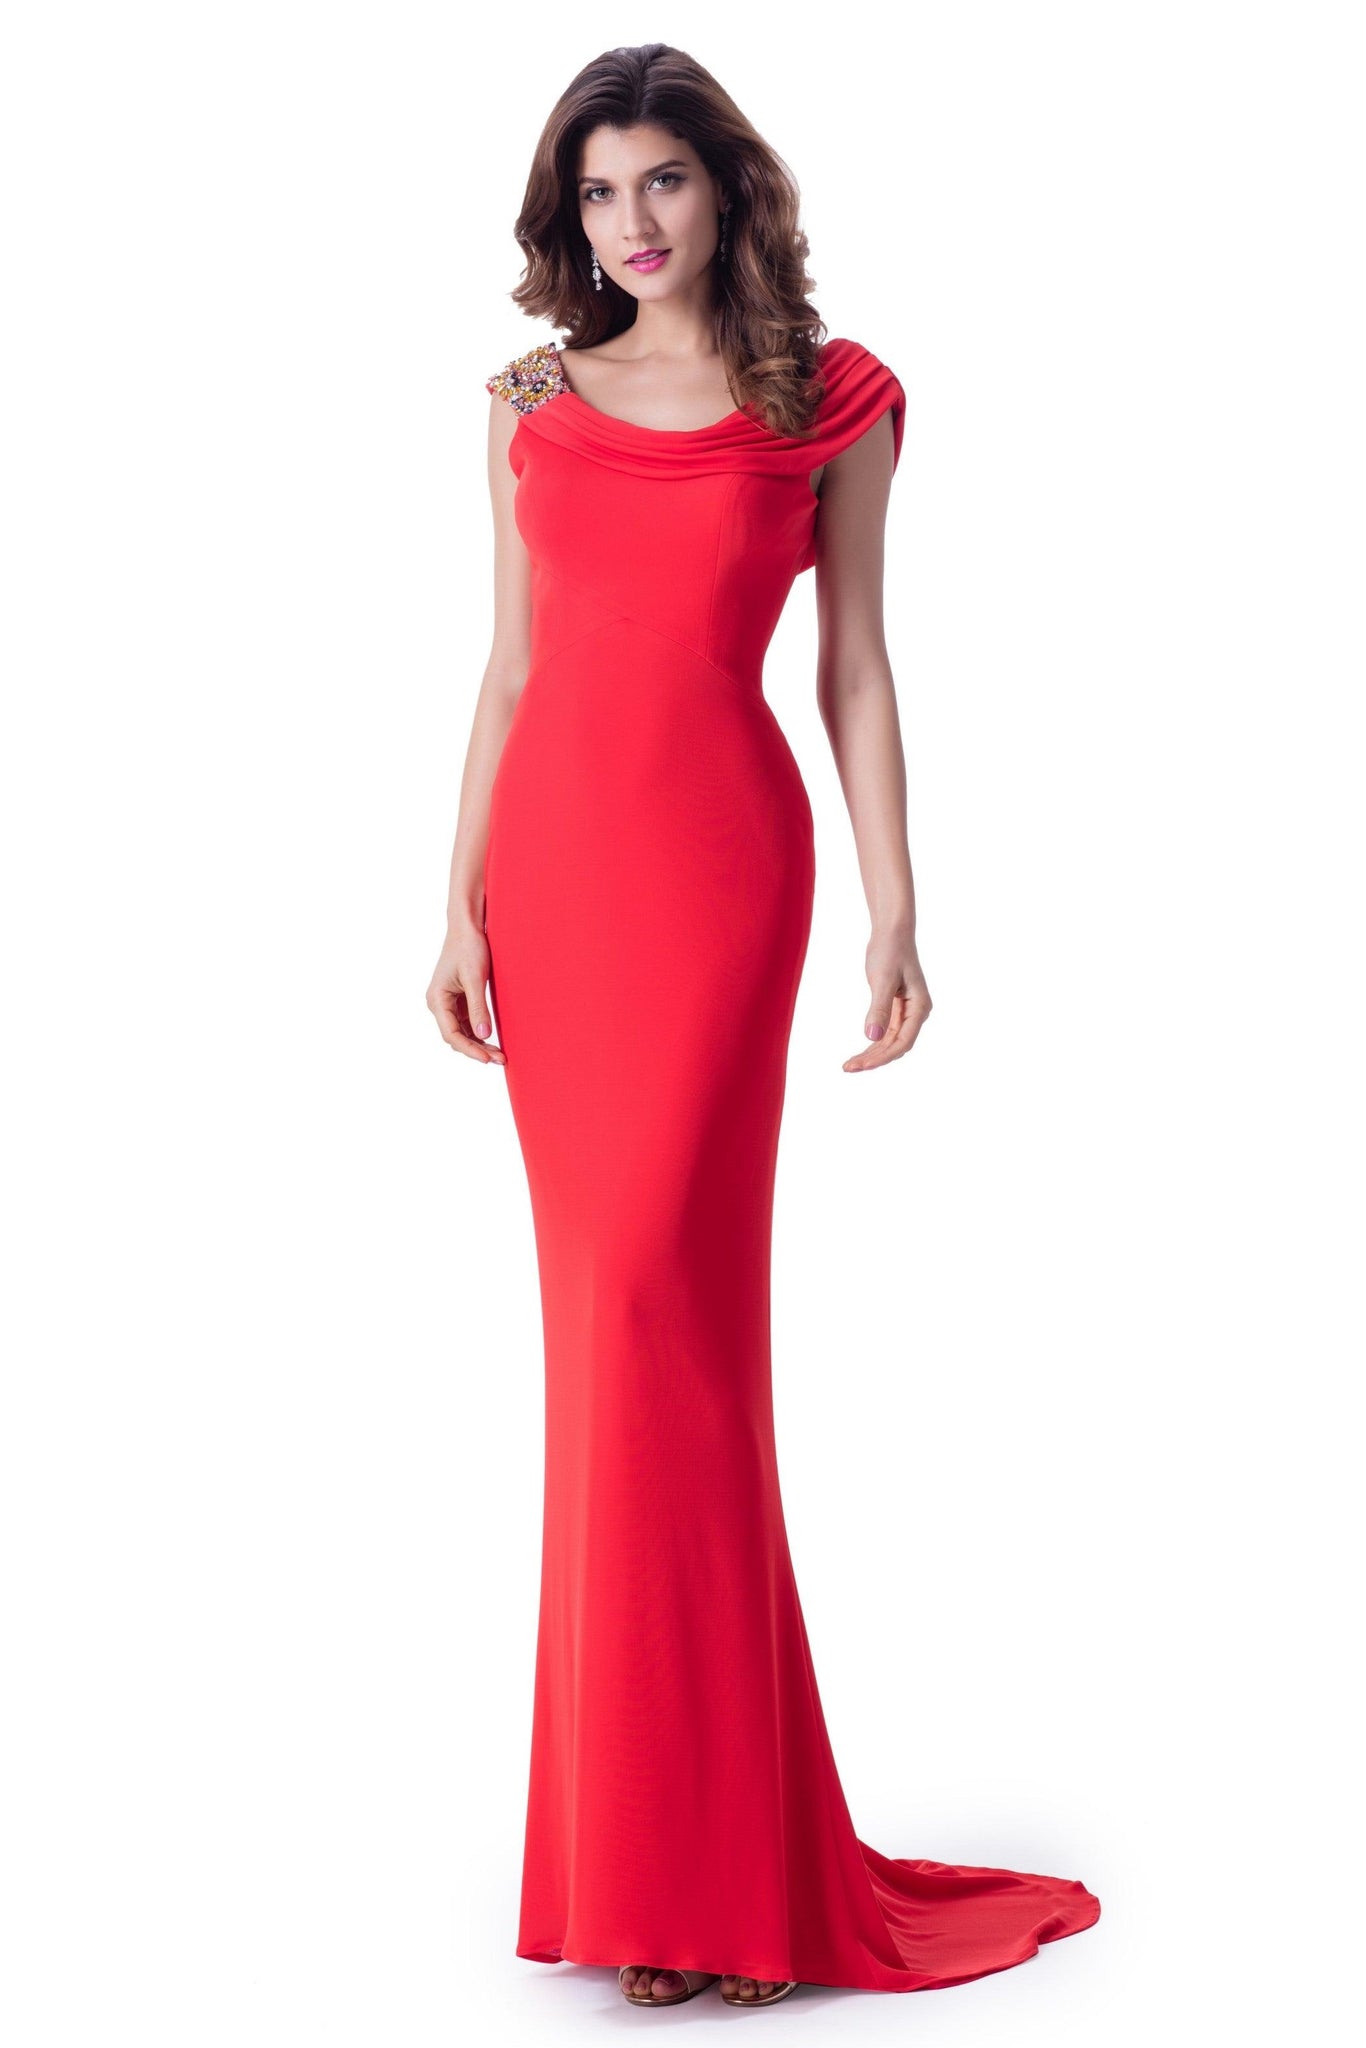 BIANCA 30% OFF WAS £295 NOW - Adore Bridal and Occasion Wear